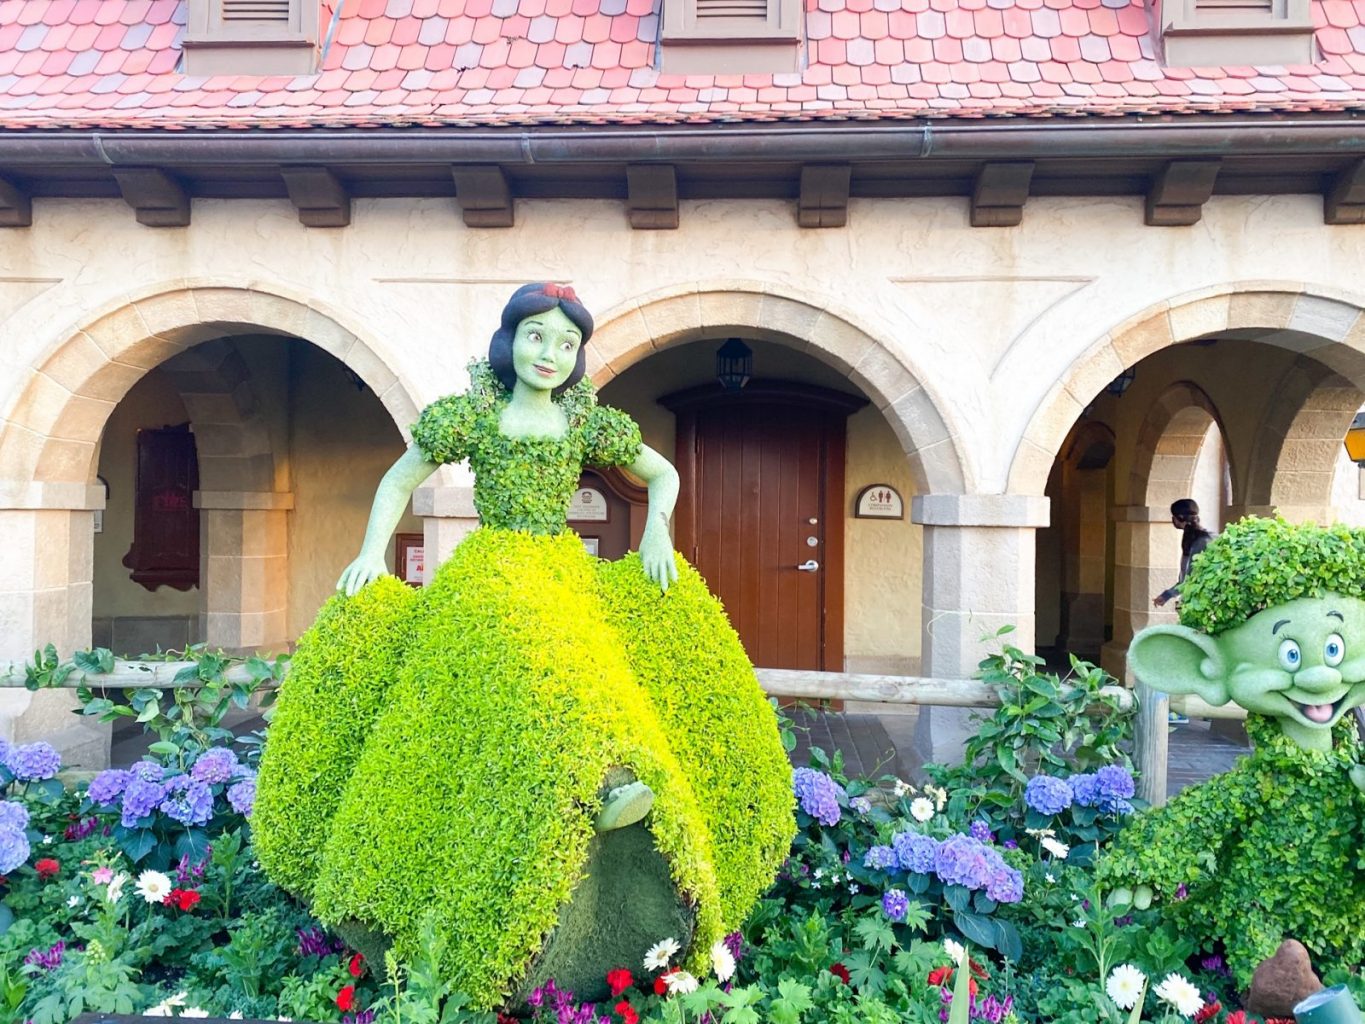 snow white made of plants